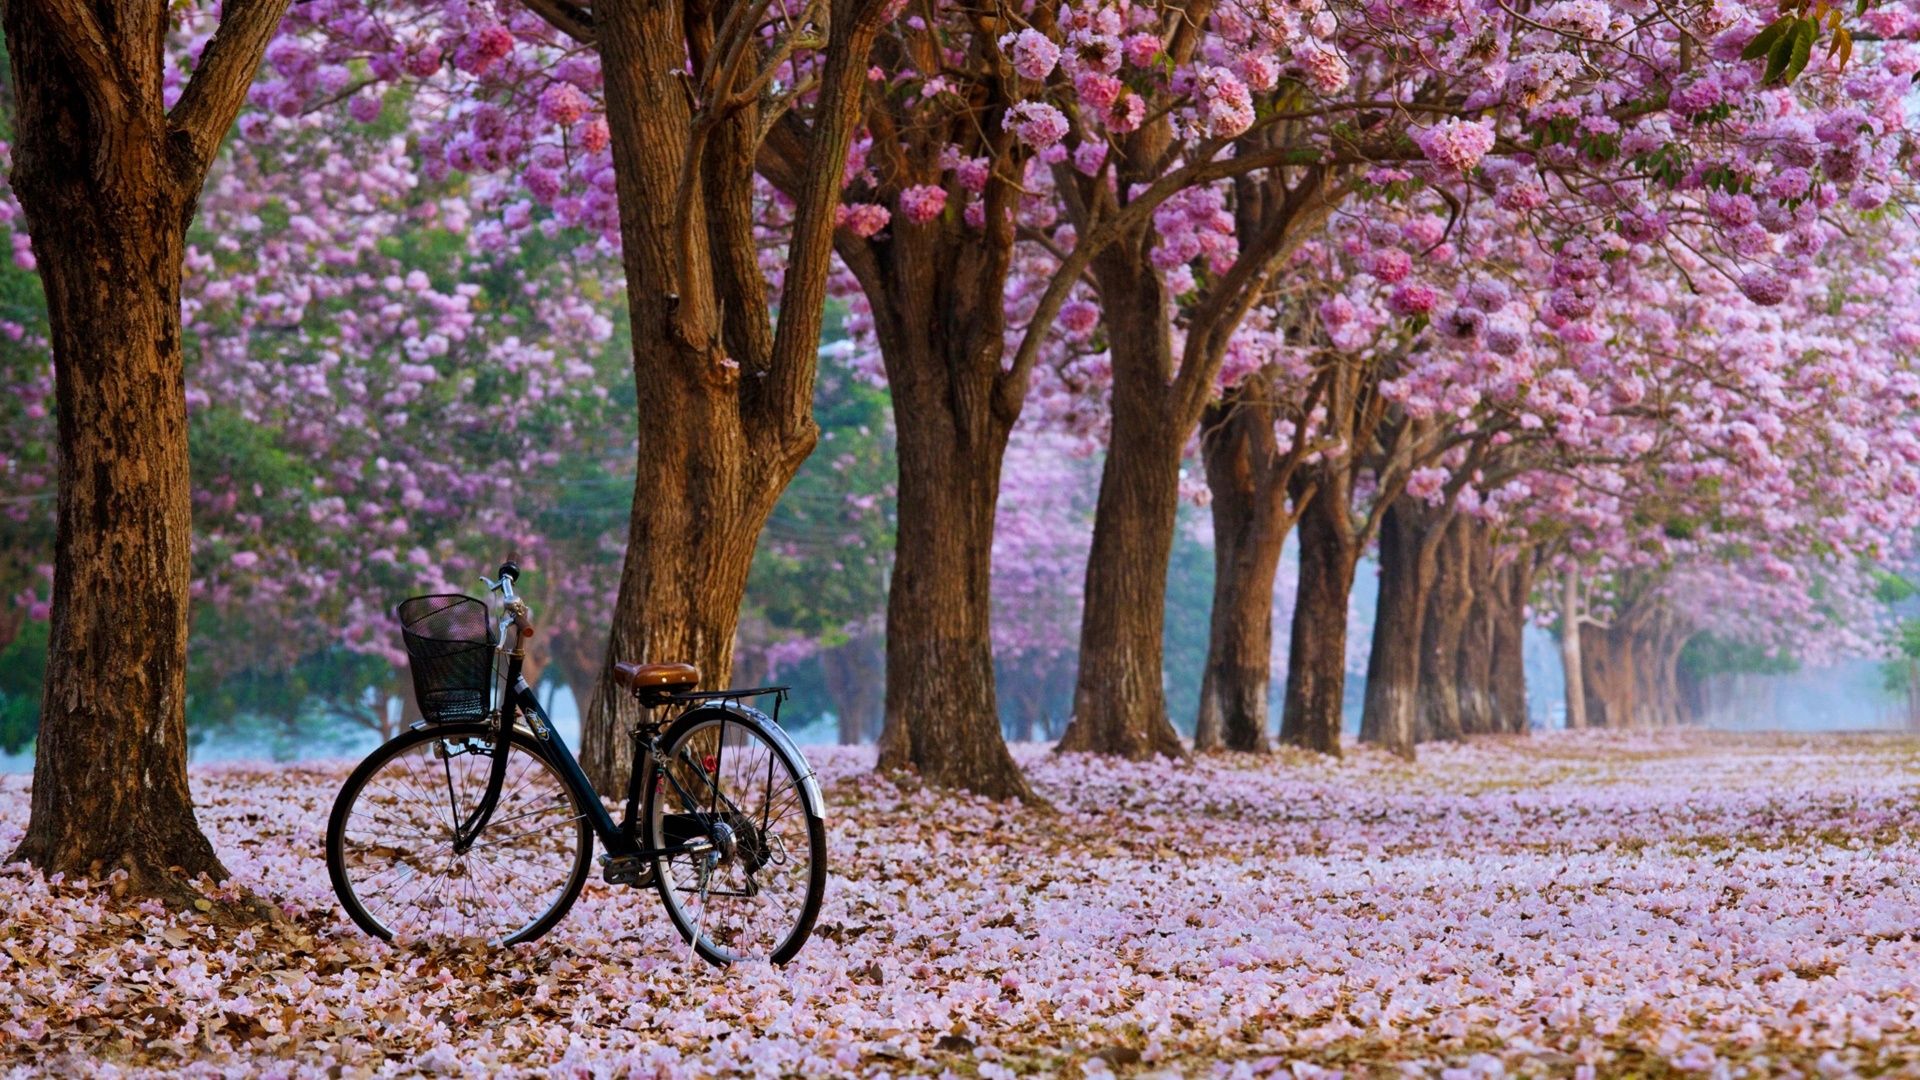 Spring season 8k wallpaper Resolution 1920x1080 | Best Download this awesome wallpaper - Cool Wallpaper HD - CoolWallpaper-HD.com